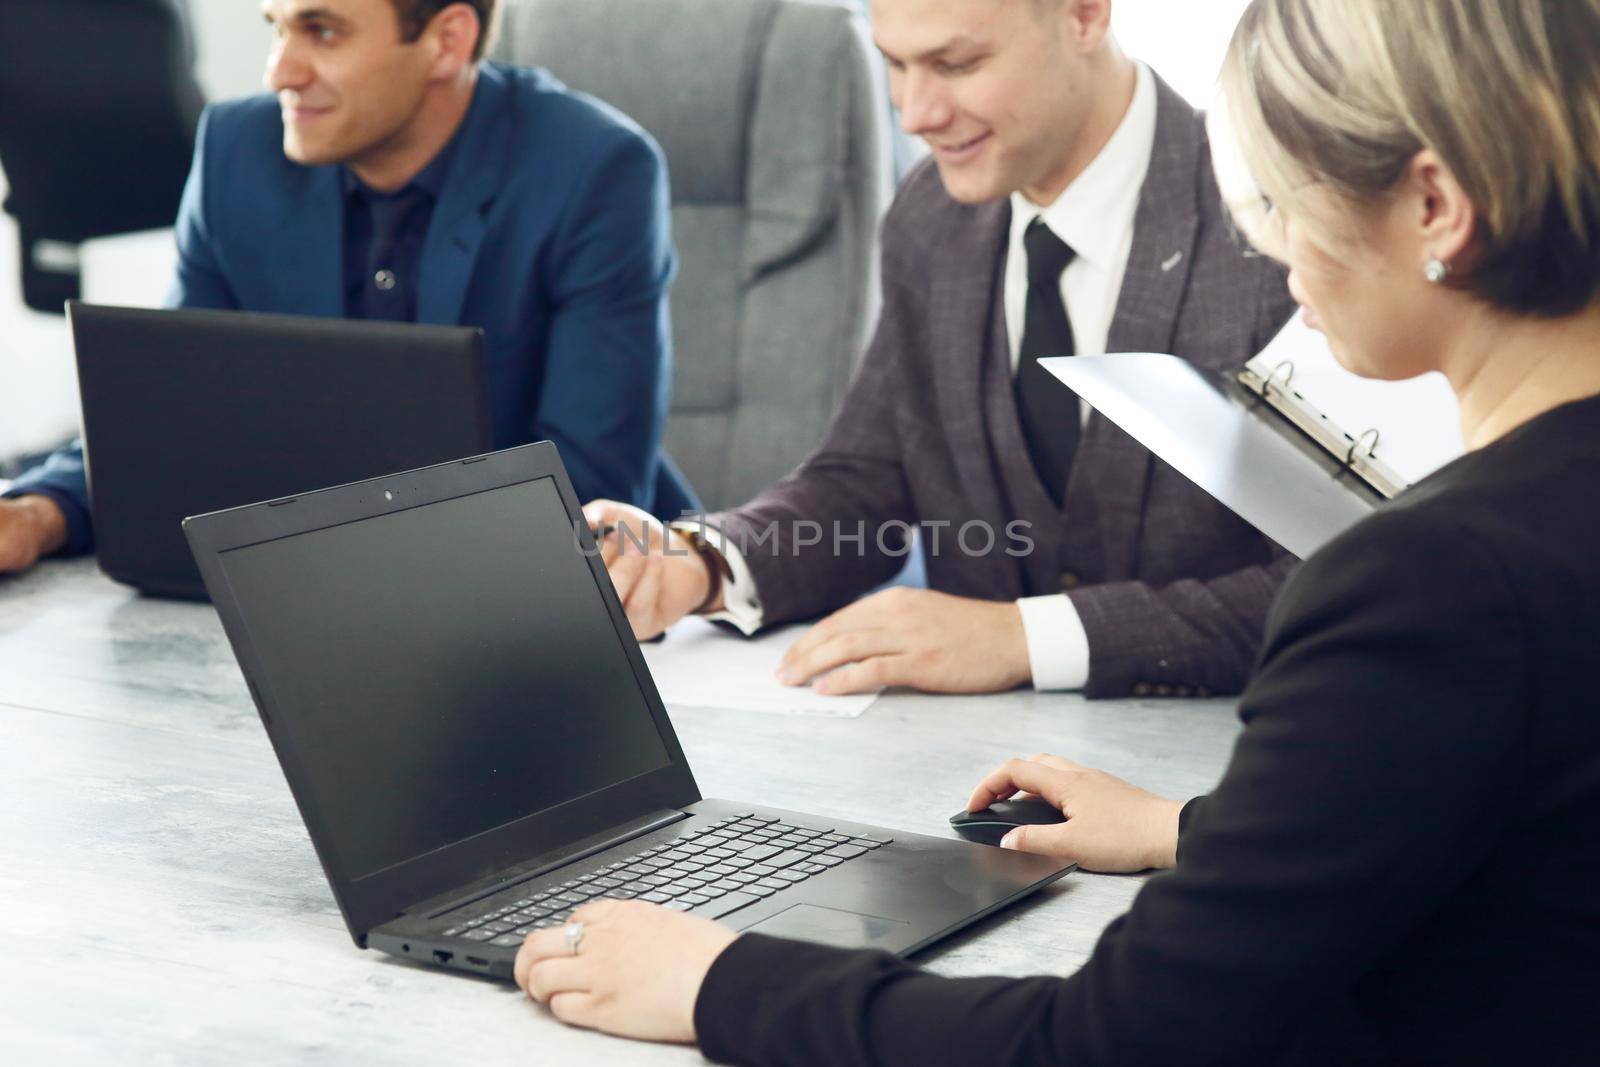 Laptop against the background of a group of young business people in the office discussing a work idea together. 